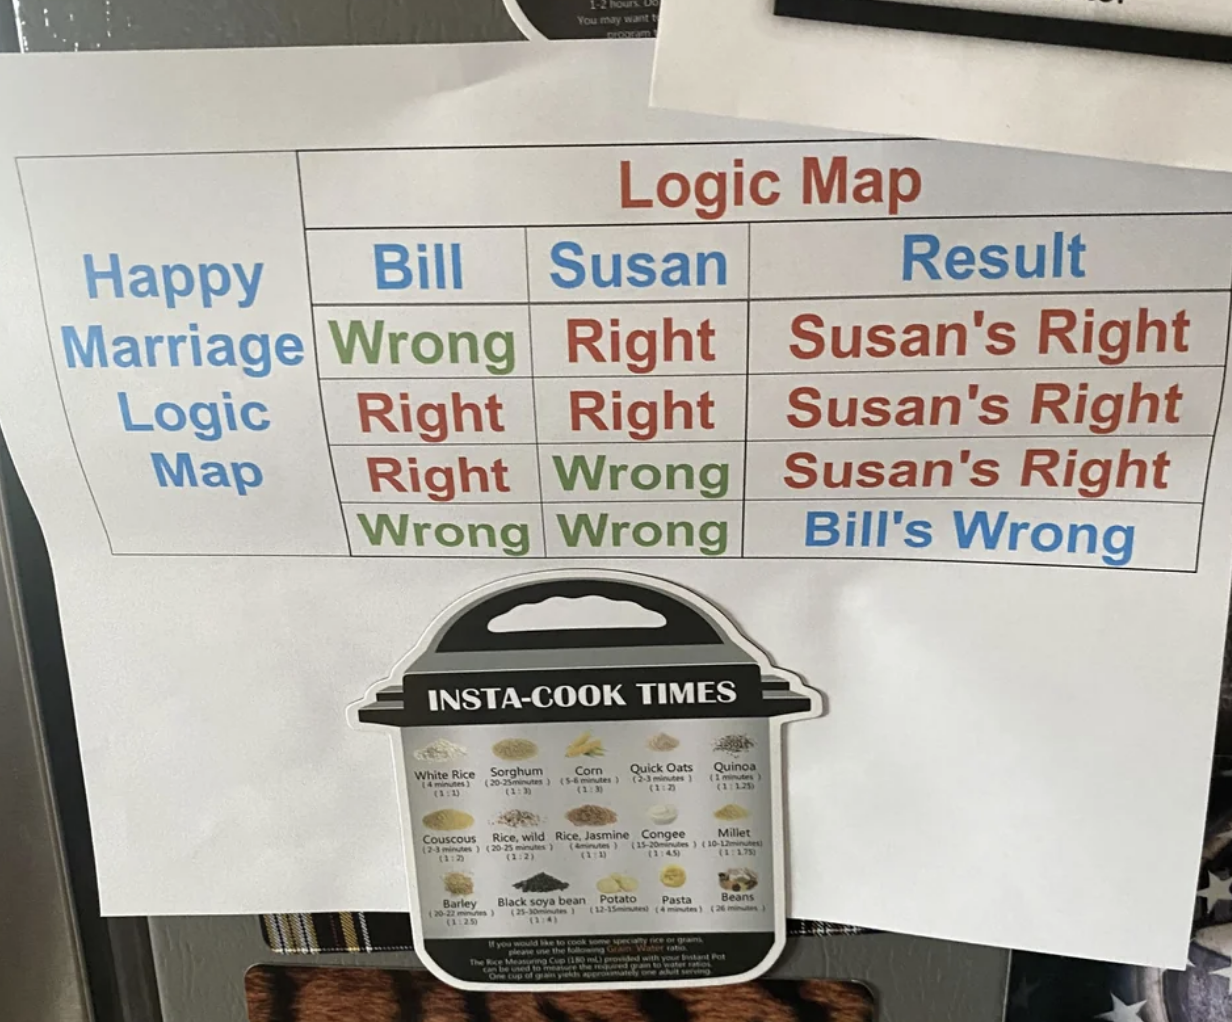 husband and wife flow chart of who is wrong or right and the wife is always right